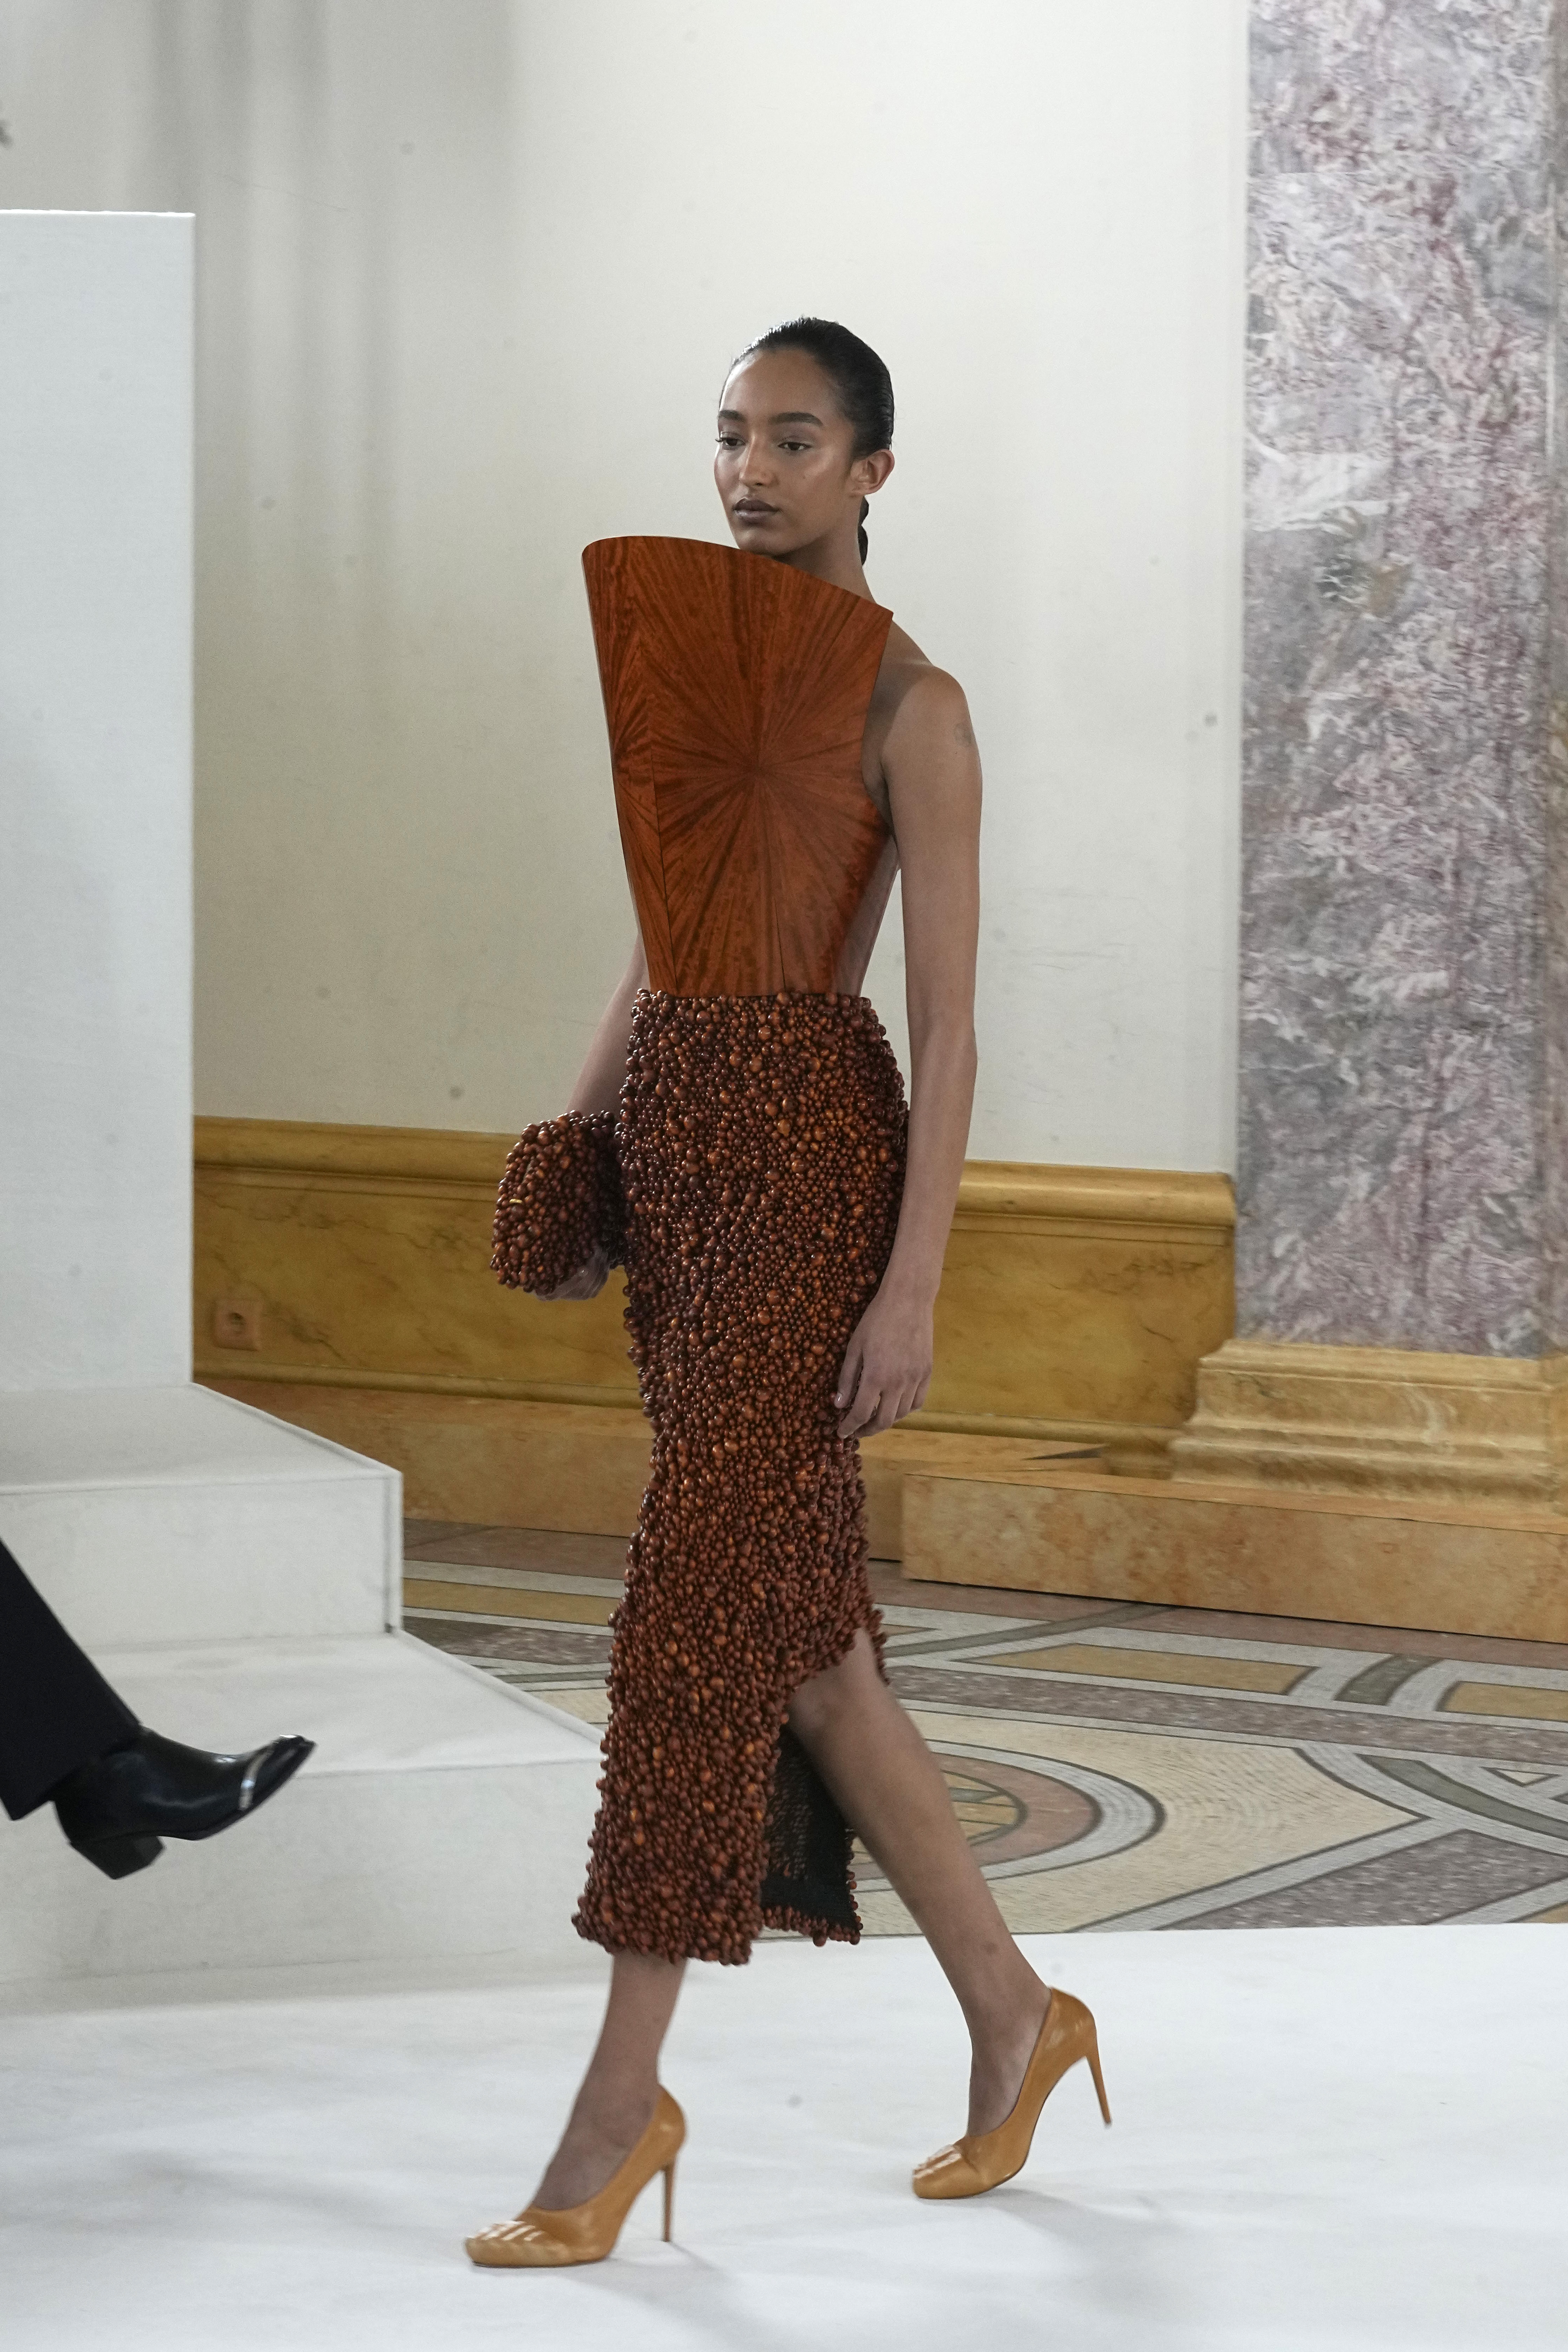 Spring/summer 2023 haute couture shows take inspiration from